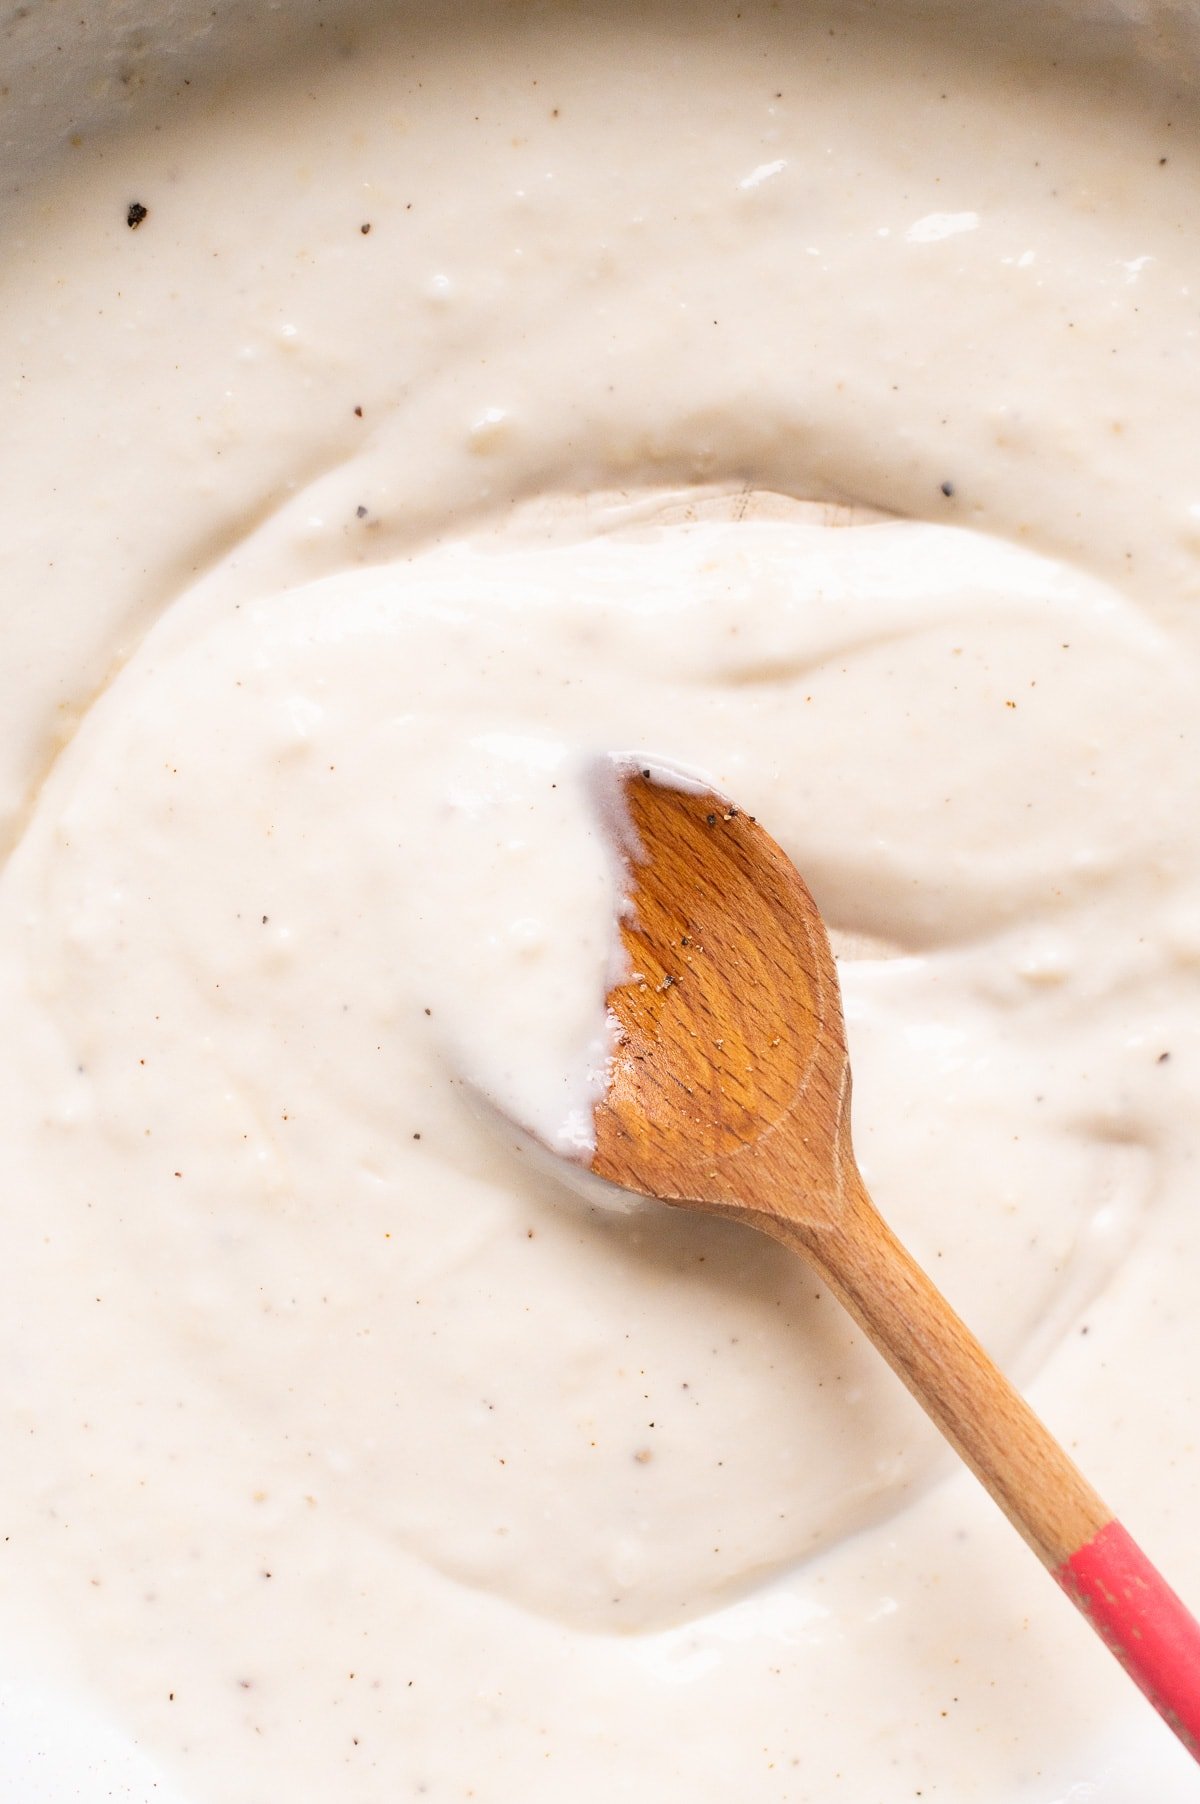 Healthy alfredo sauce on a wooden spoon.